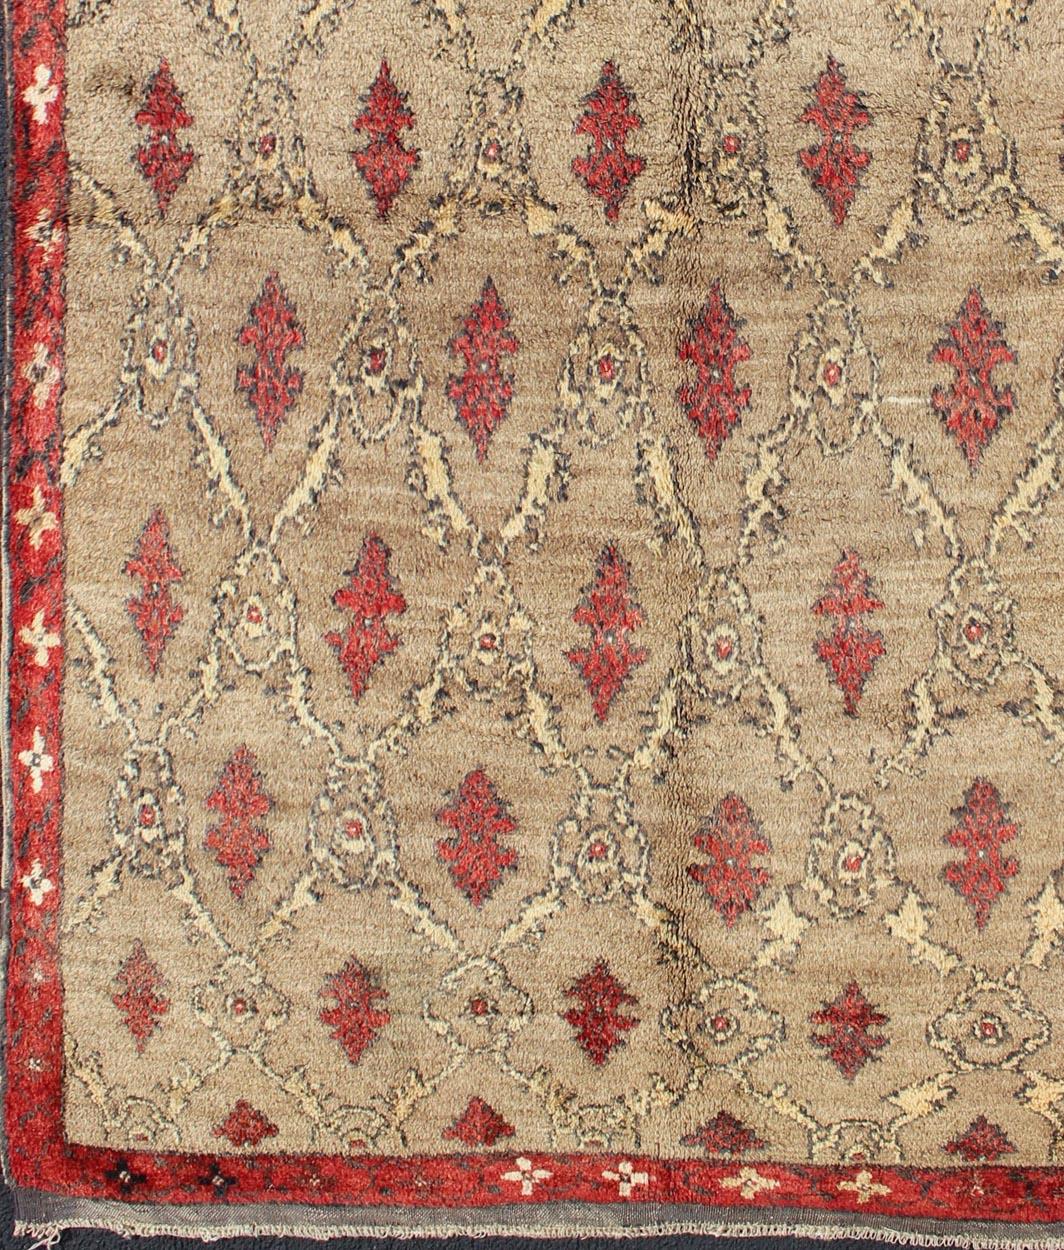 Mid century Tulu carpet in sand color background.

This mid century Tulu rug features repeating red motifs laid across a sand-colored field and enclosed within similarly-colored frames. 

Tulu rugs were woven in Konya area, in central Anatolia,